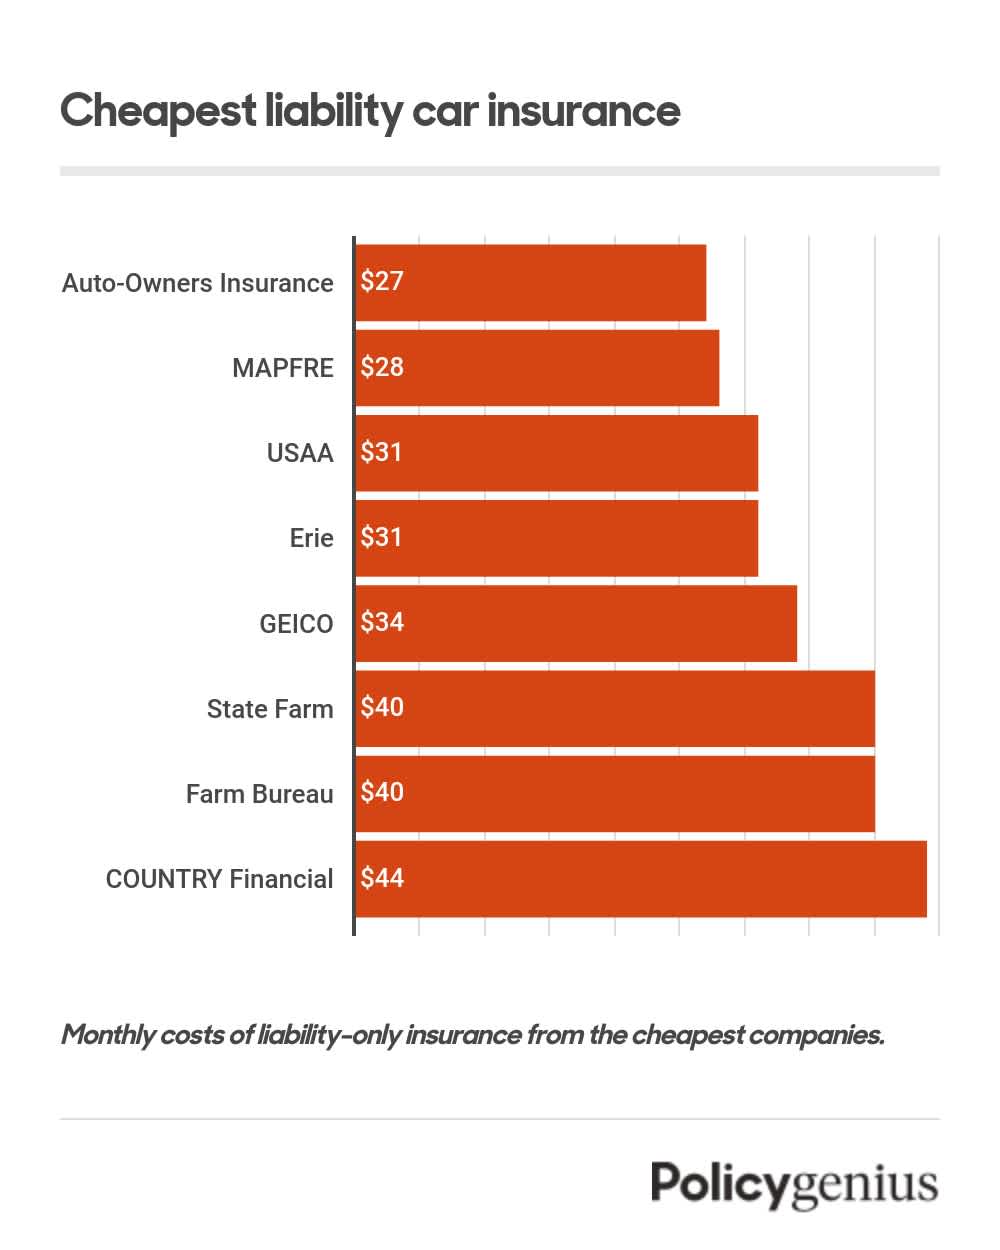 A bar graph showing the cheapest companies for liability-only insurance.